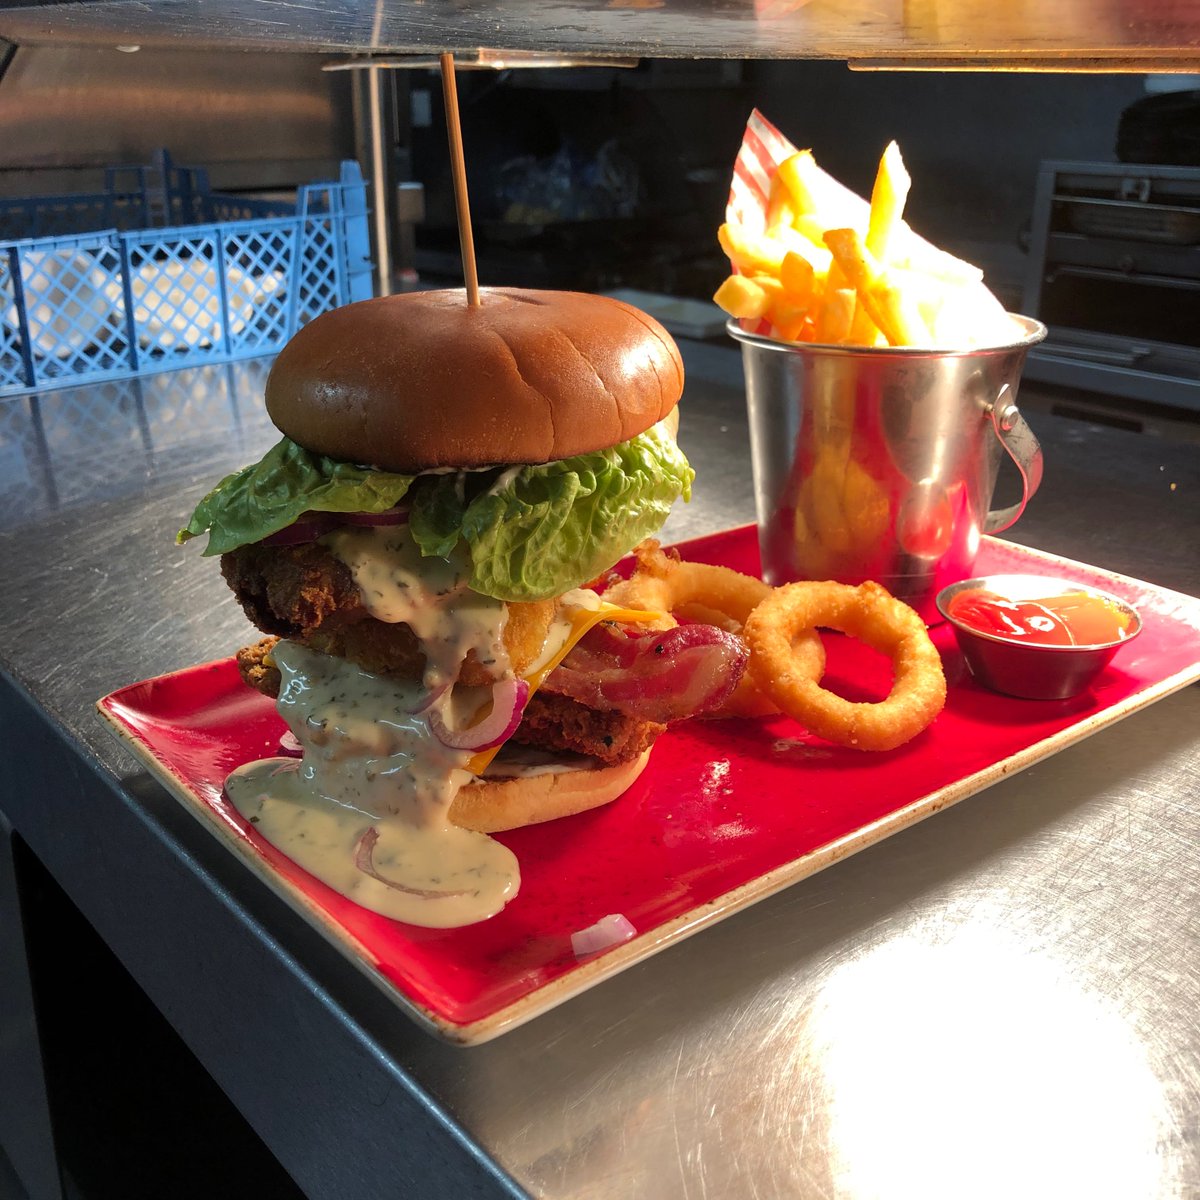 Mmmm our tasty Ranch Burger , why not try it , you won’t be disappointed 🍔🍔🍔
#burger #lunch #dinner #tasty #burstingwithflavour #pubgrub